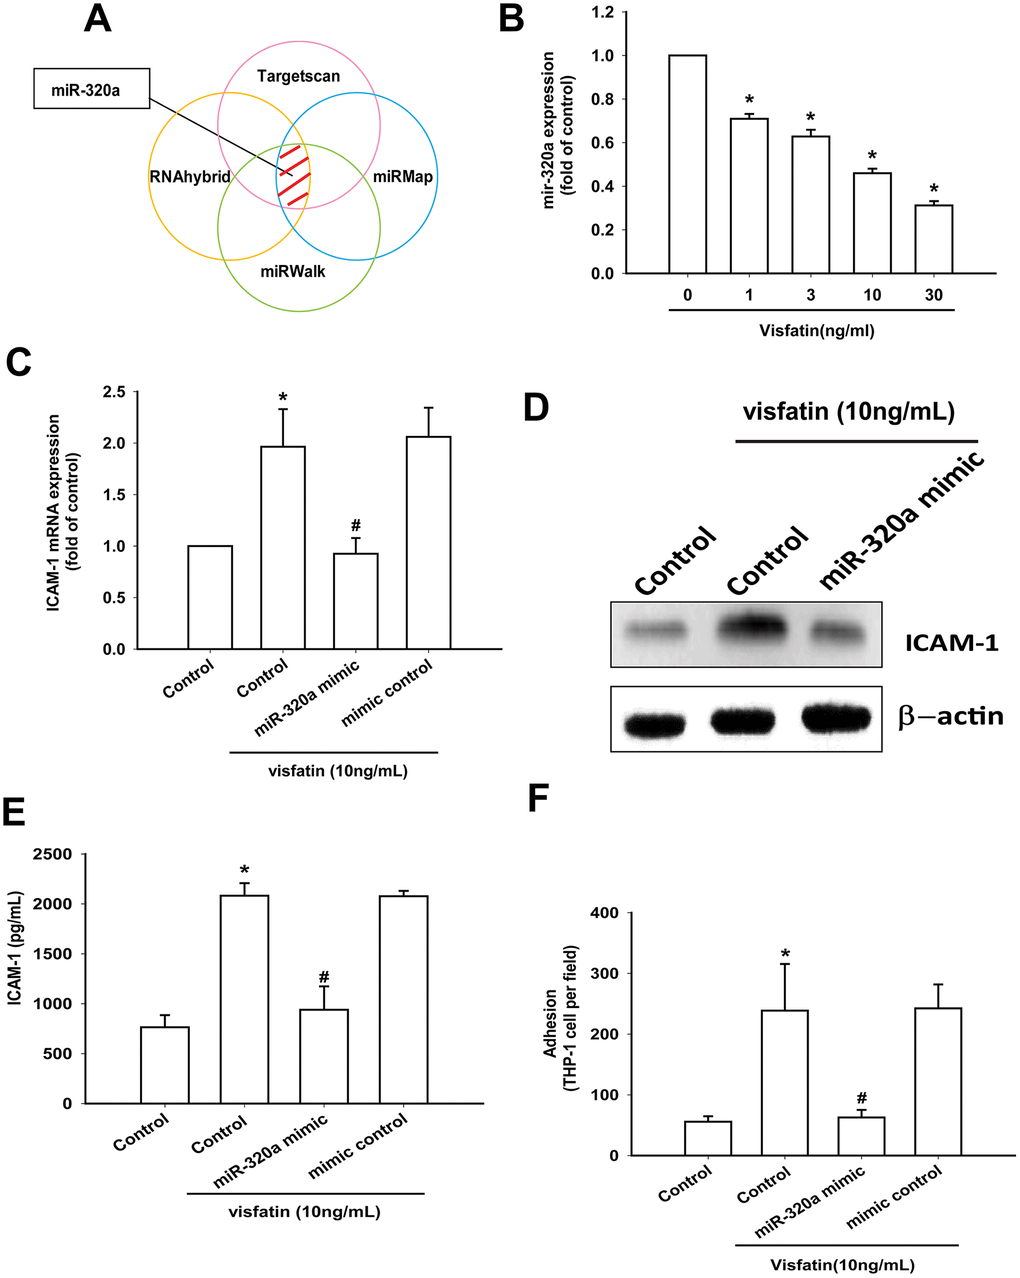 Visfatin promotes ICAM-1 production and monocyte adhesion by suppressing miR-320a. (A) Open-source software (TargetScan, miRMap, RNAhybrid, and miRWalk) was used to identify which miRNAs could possibly interfere with ICAM-1 transcription. (B) OASFs were incubated with visfatin (1–30 ng/mL). miR-320a expression was examined by RT-qPCR. (C–E) OASFs were transfected with miR-144-3p mimic and mimic control (serving as the vehicle control) and then stimulated with visfatin. ICAM-1 levels were examined by RT-qPCR, Western blot and ELISA assays. (F) OASFs were treated with the same conditions as those described in (C). THP-1 cells loaded with BCECF-AM were added to OASFs for 6 h, then THP-1 cell adherence was measured by fluorescence microscopy. * p#p